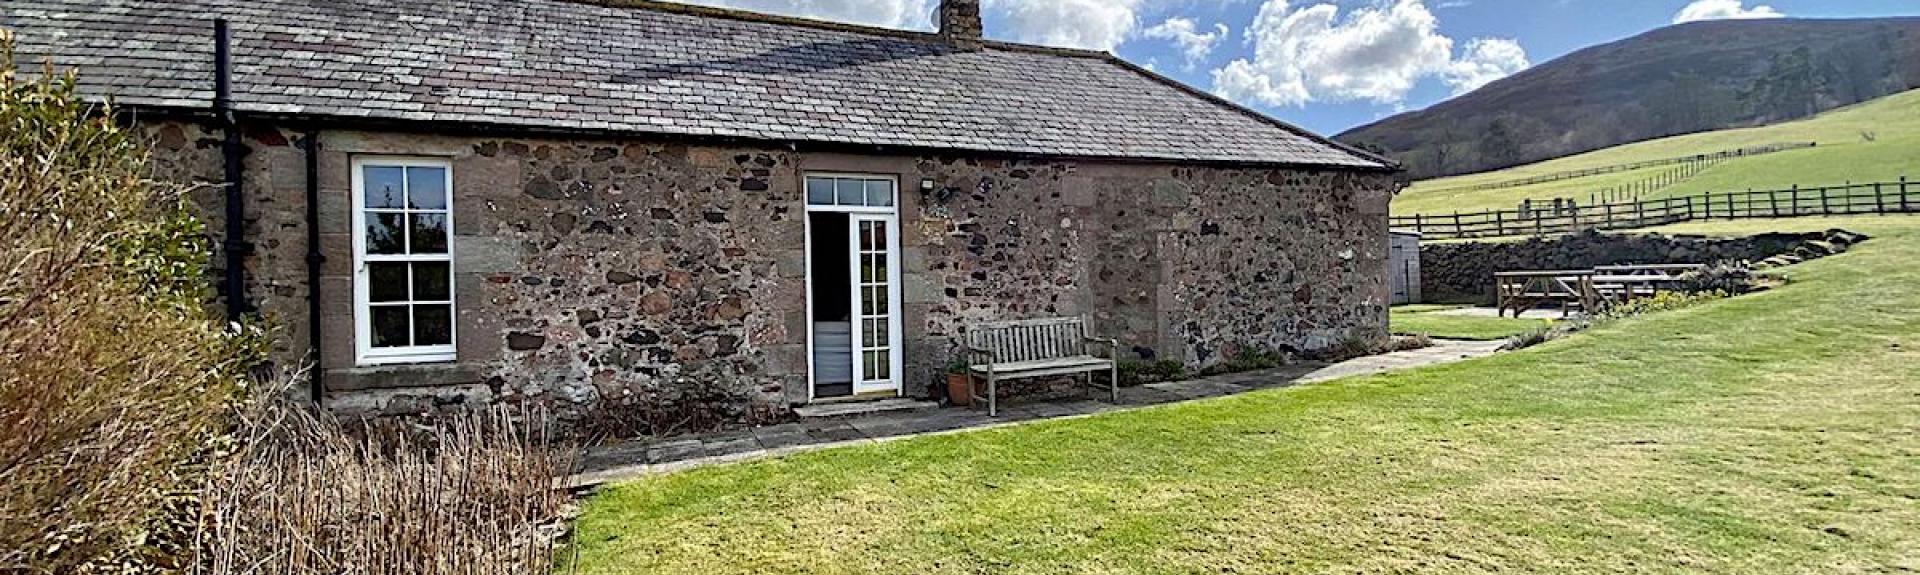 Large lawns surround a ground-floor barn conversion in remote, open Northumberland countryside